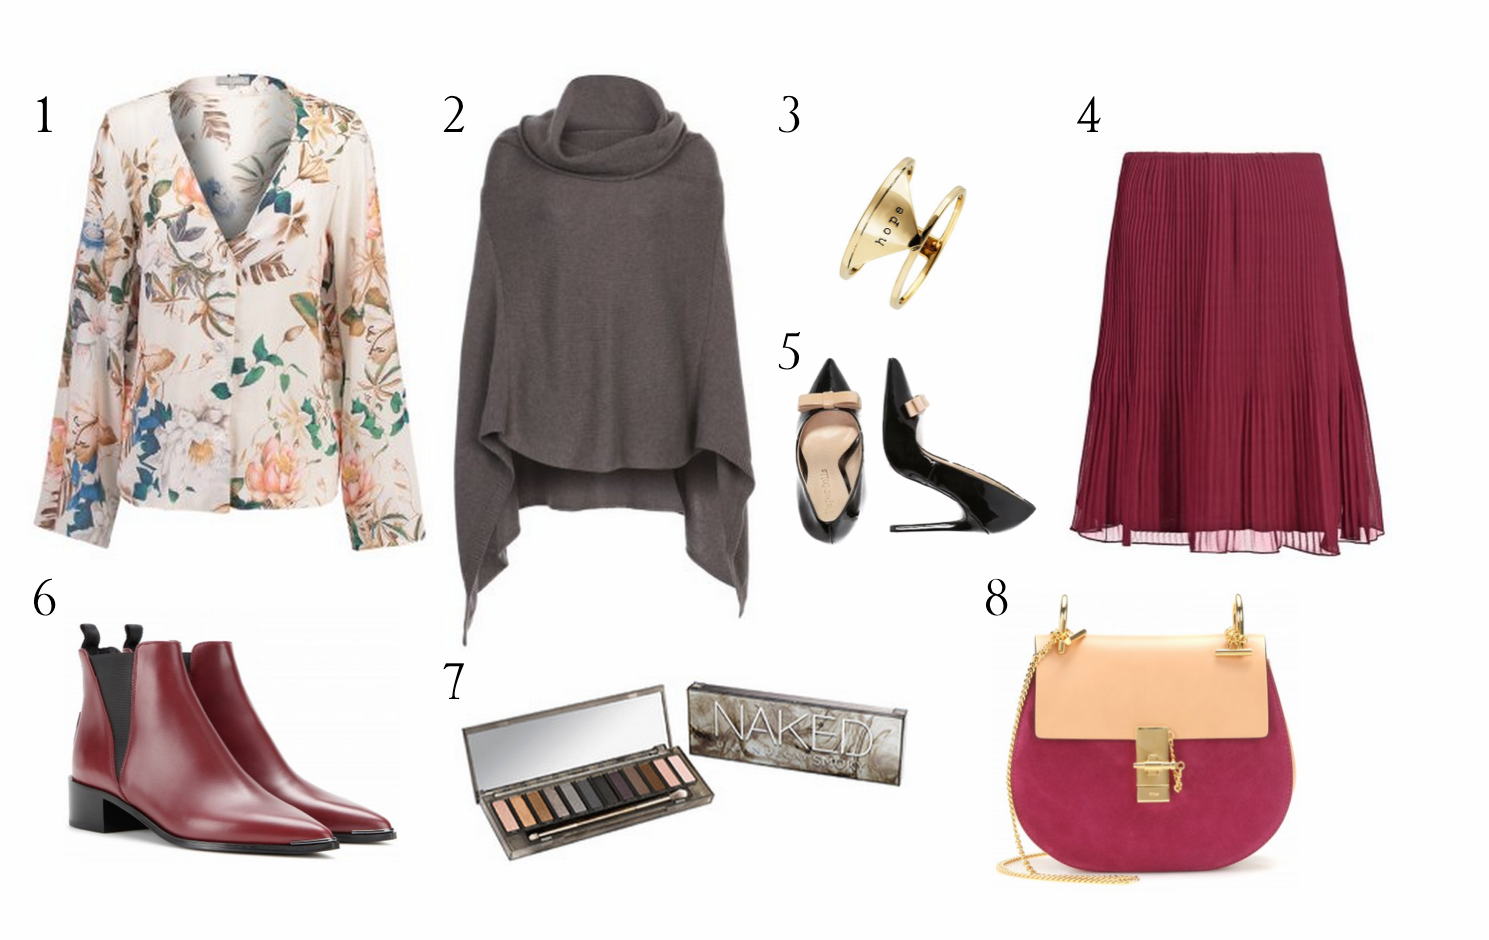 herbst-shopping-tipps-trendteile-2015-inspiration